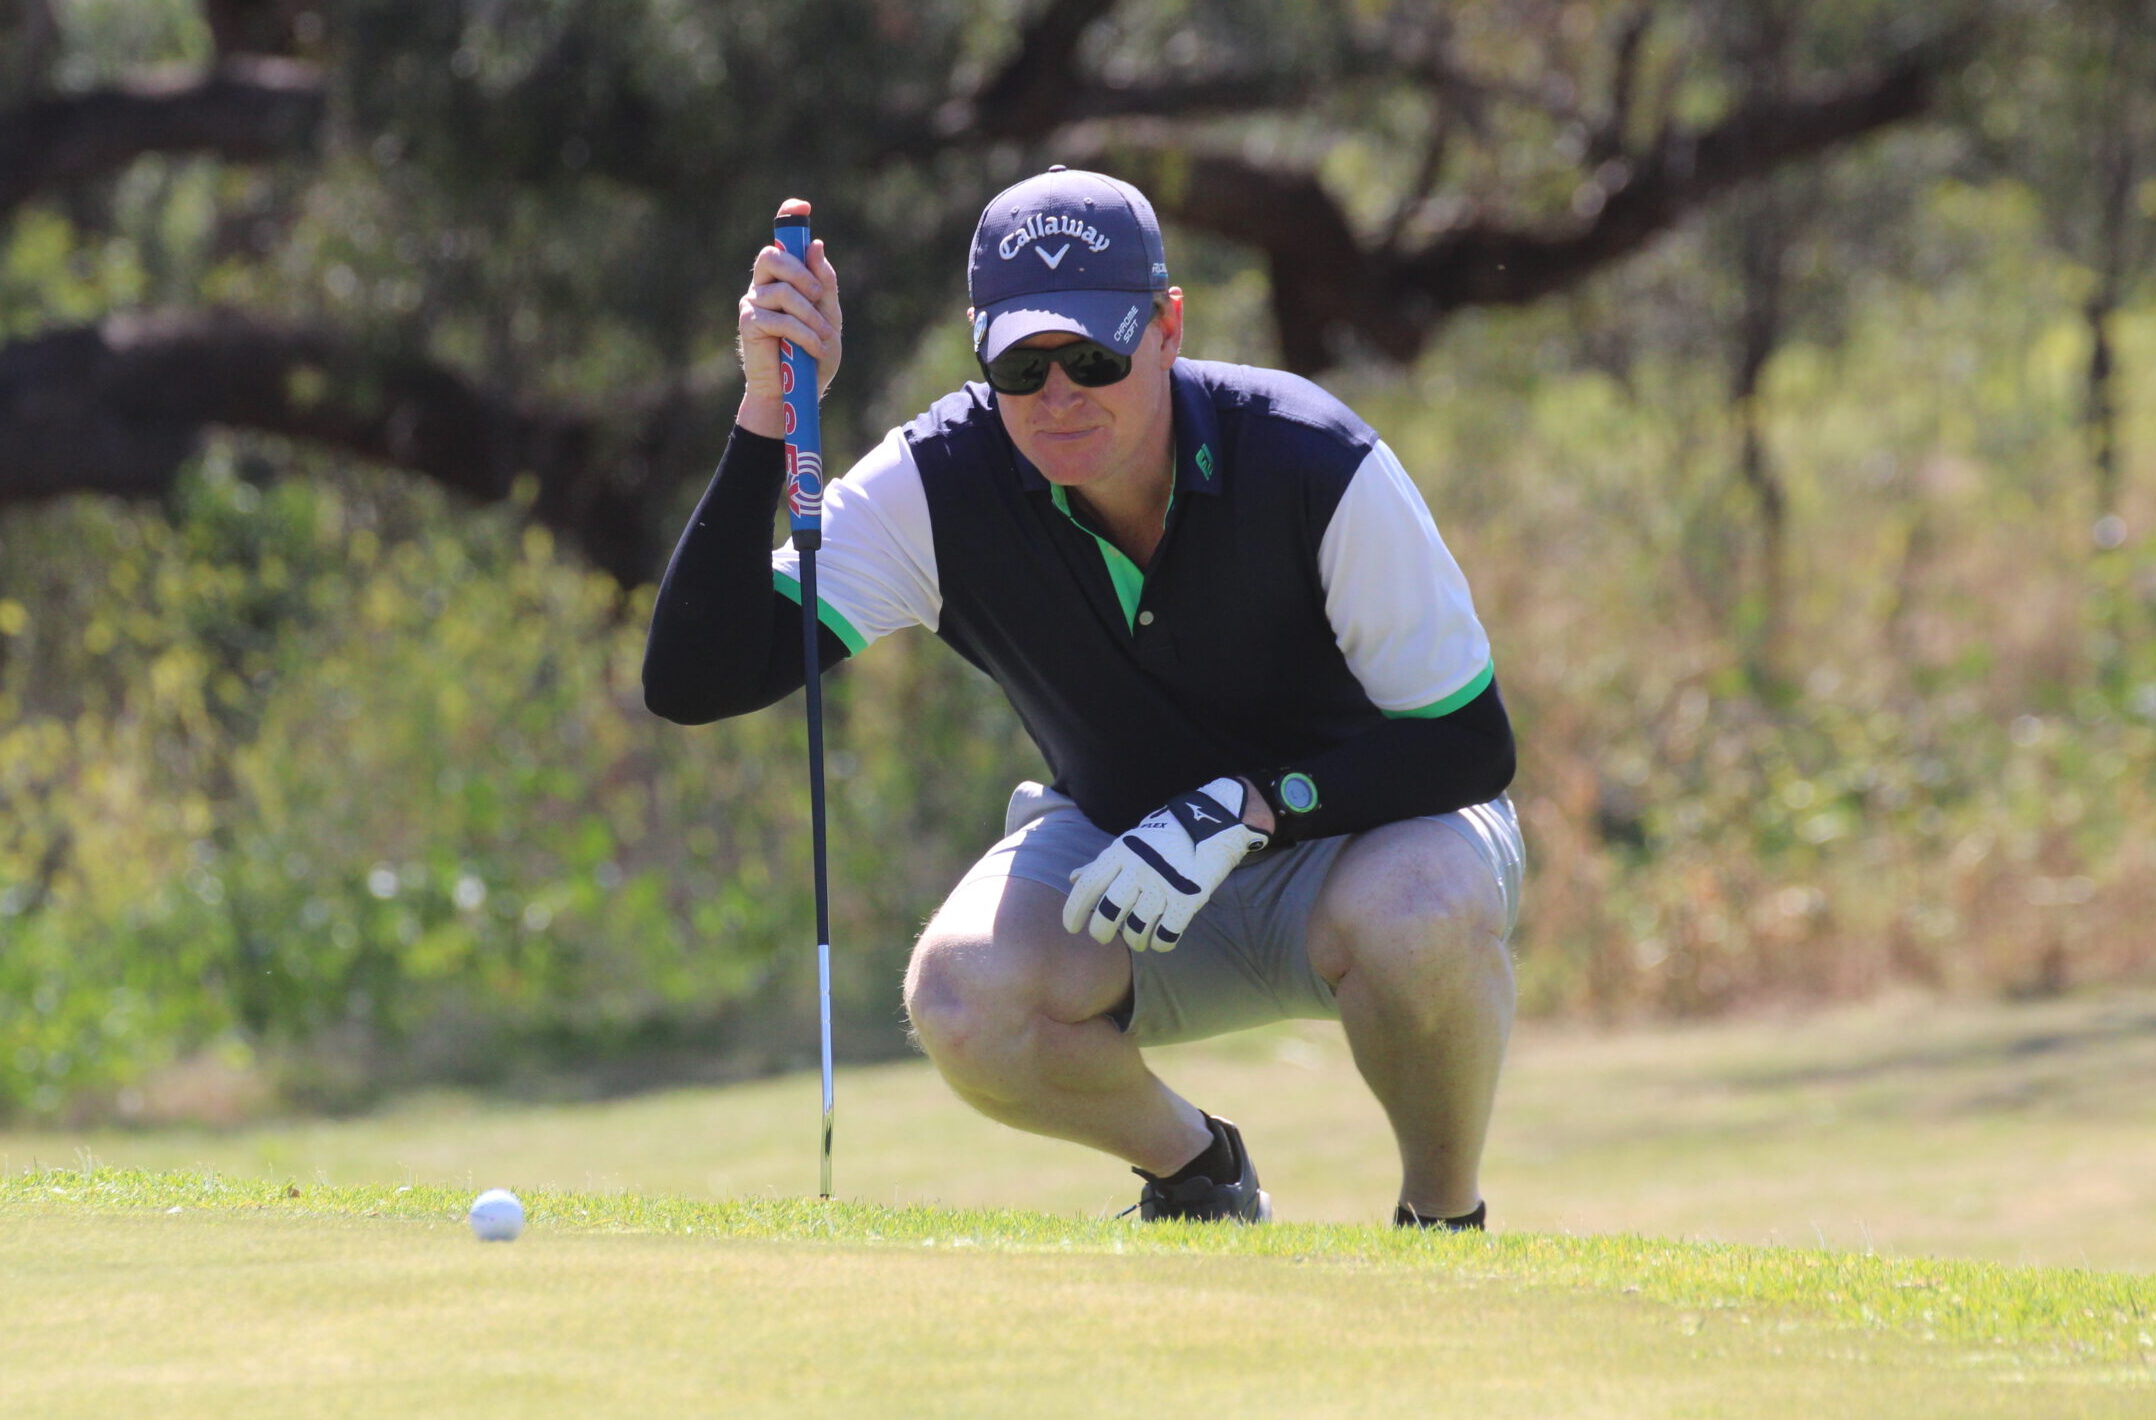 Knockout champion crowned at Wee Waa Golf Club on Sunday